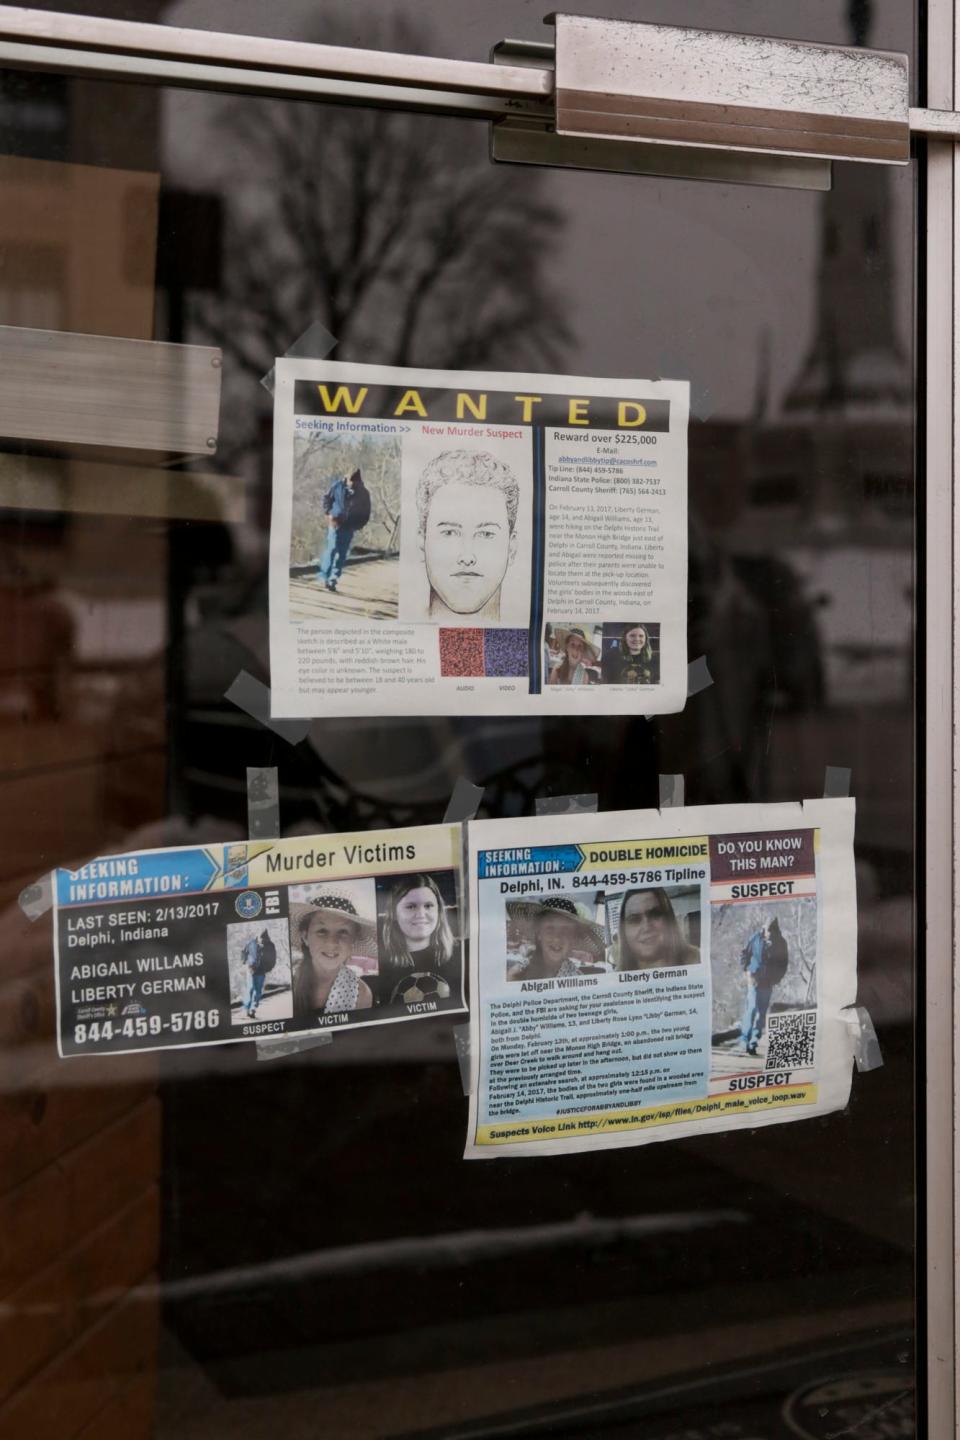 Wanted posters with the latest sketches of the suspected killer of Abby Williams and Libby German hang in the store front of a Washington Street business, Wednesday, Feb. 10, 2021 in Delphi. Abby Williams and Libby German, both Delphi eighth-graders, were murdered while hiking a popular community trail near Delphi on Feb. 13, 2017.